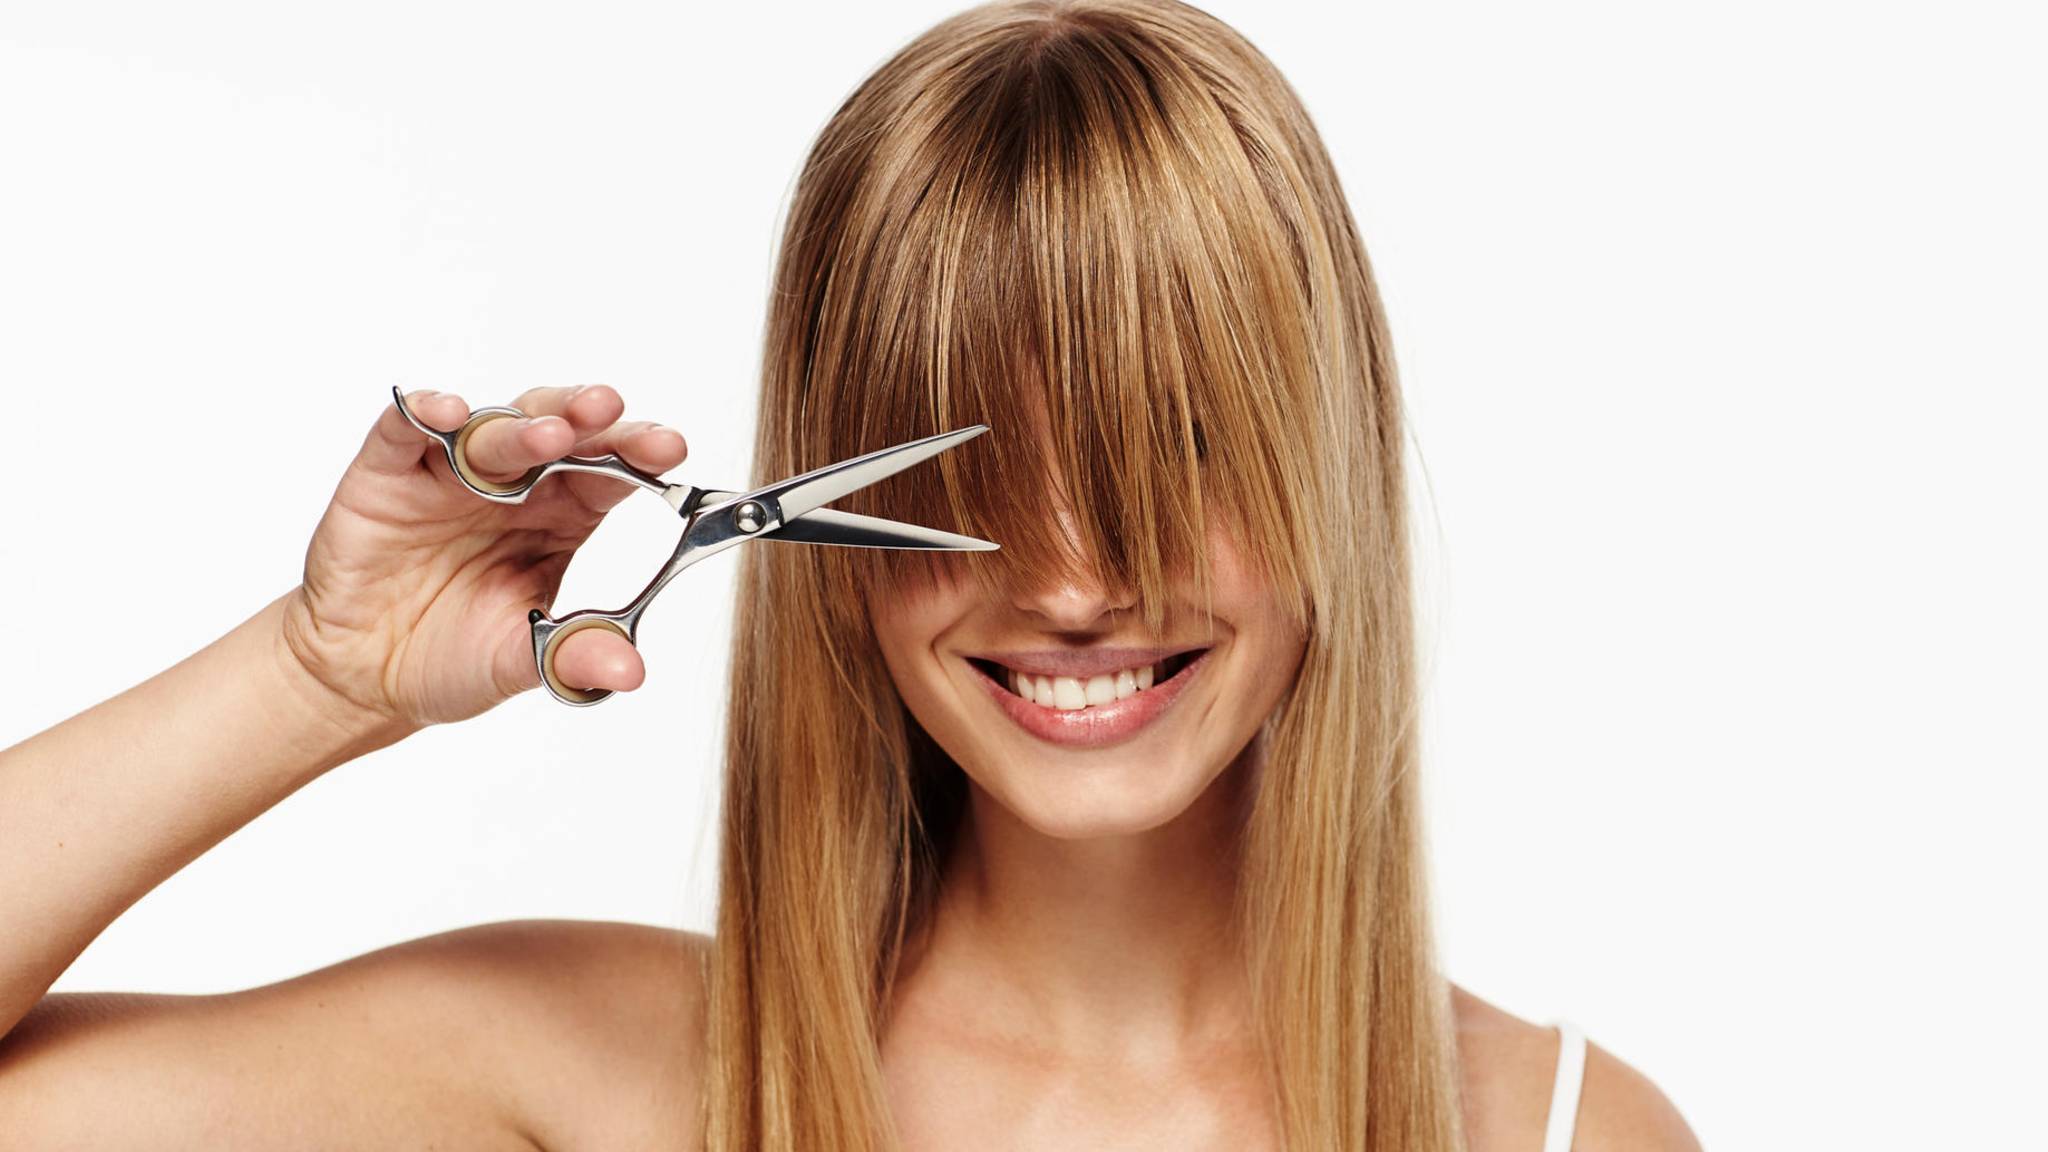 How to cut bangs at home: 10 useful tips